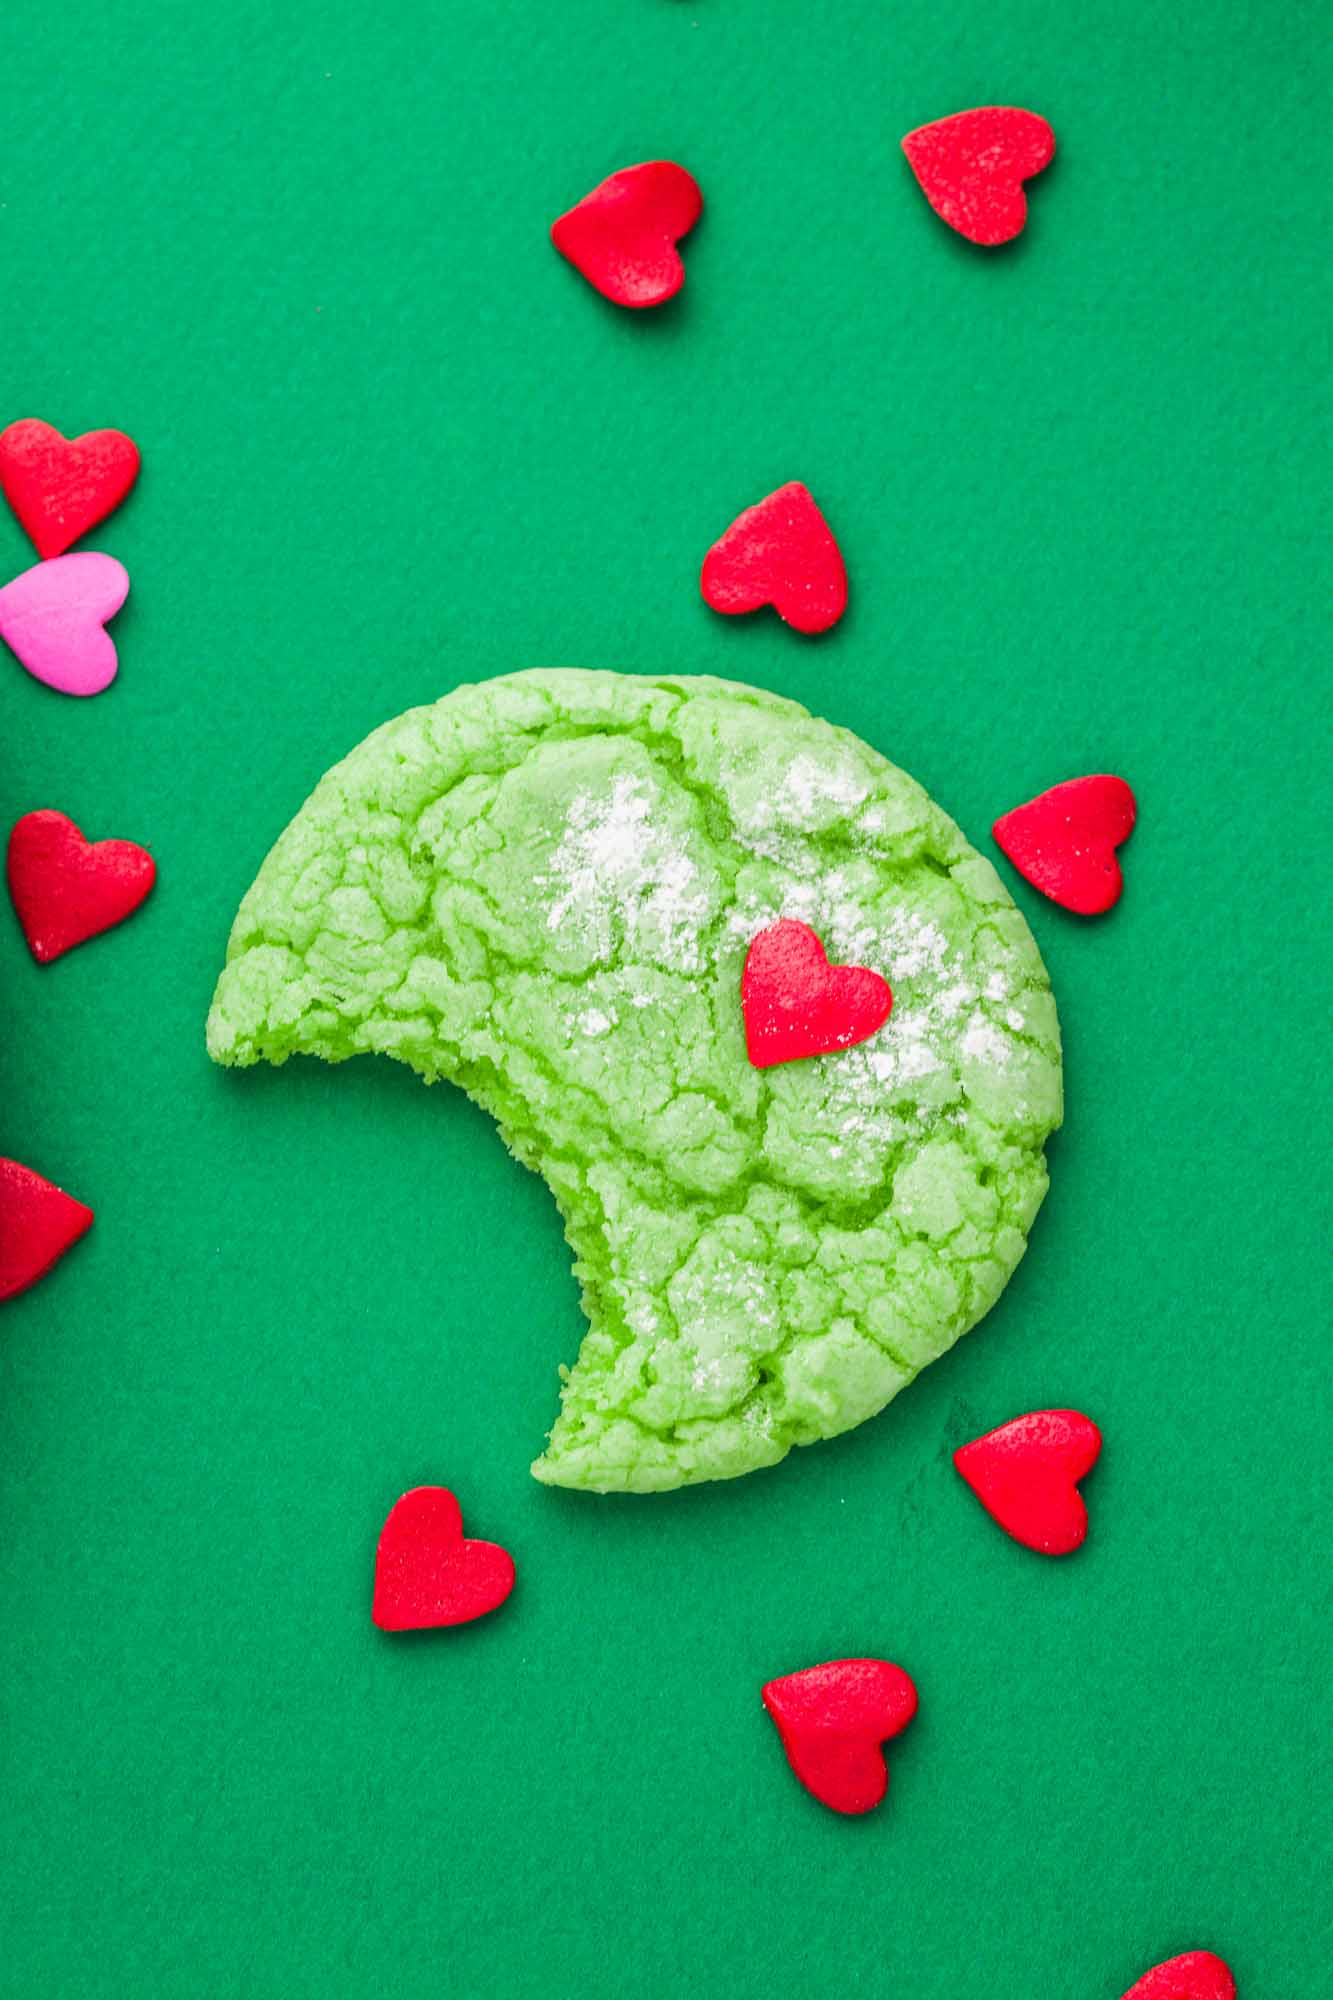 One green grinch cookie showing a bite shot, and heart sprinkles surrounding it. Placed on a dark green background.